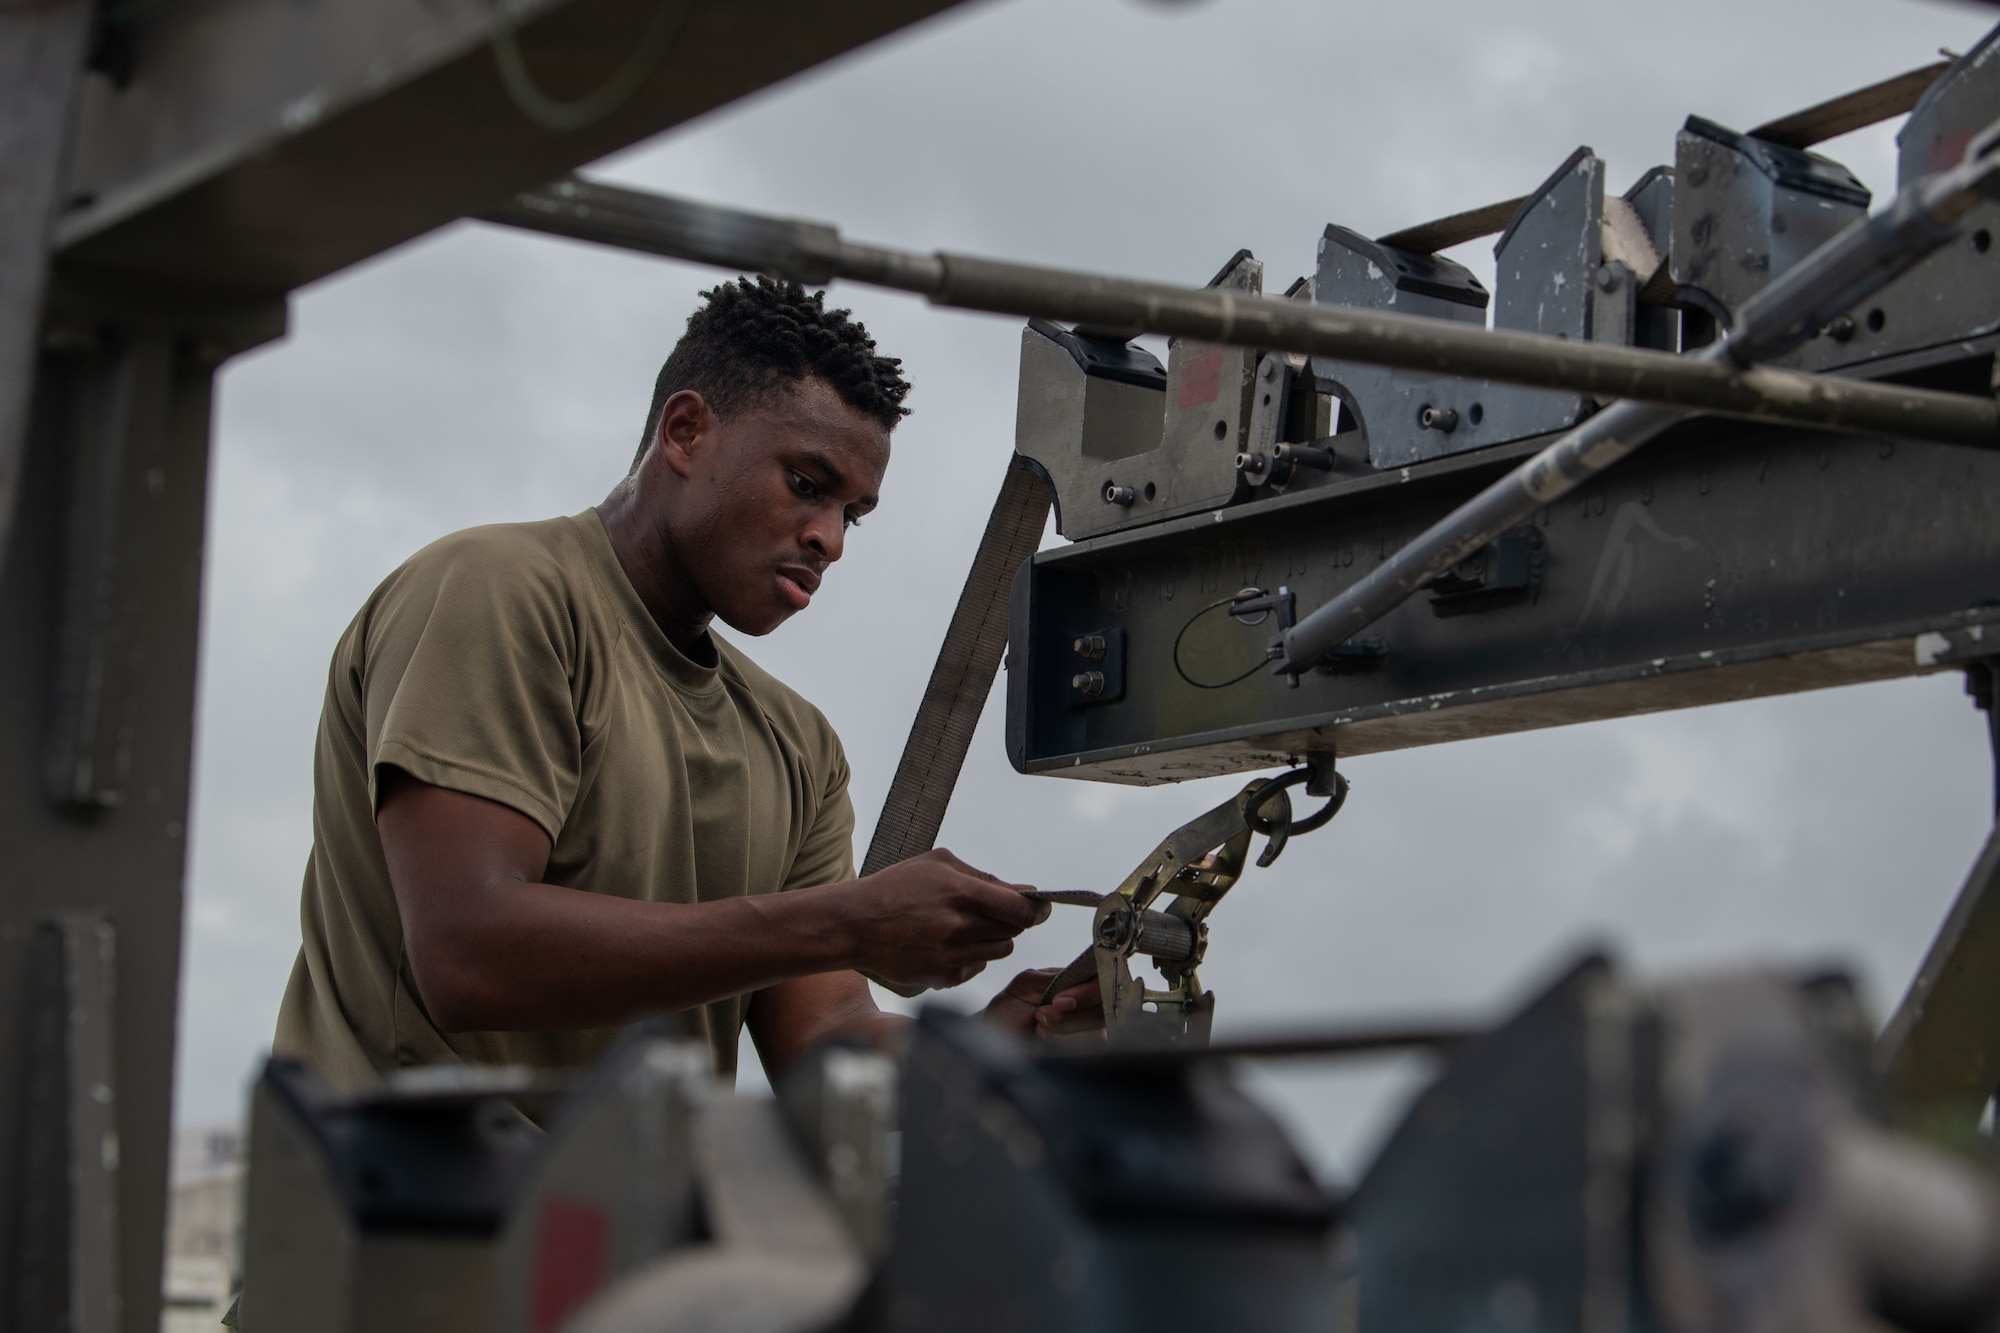 Technician secures straps on a munitions rack during a weapons load competition.